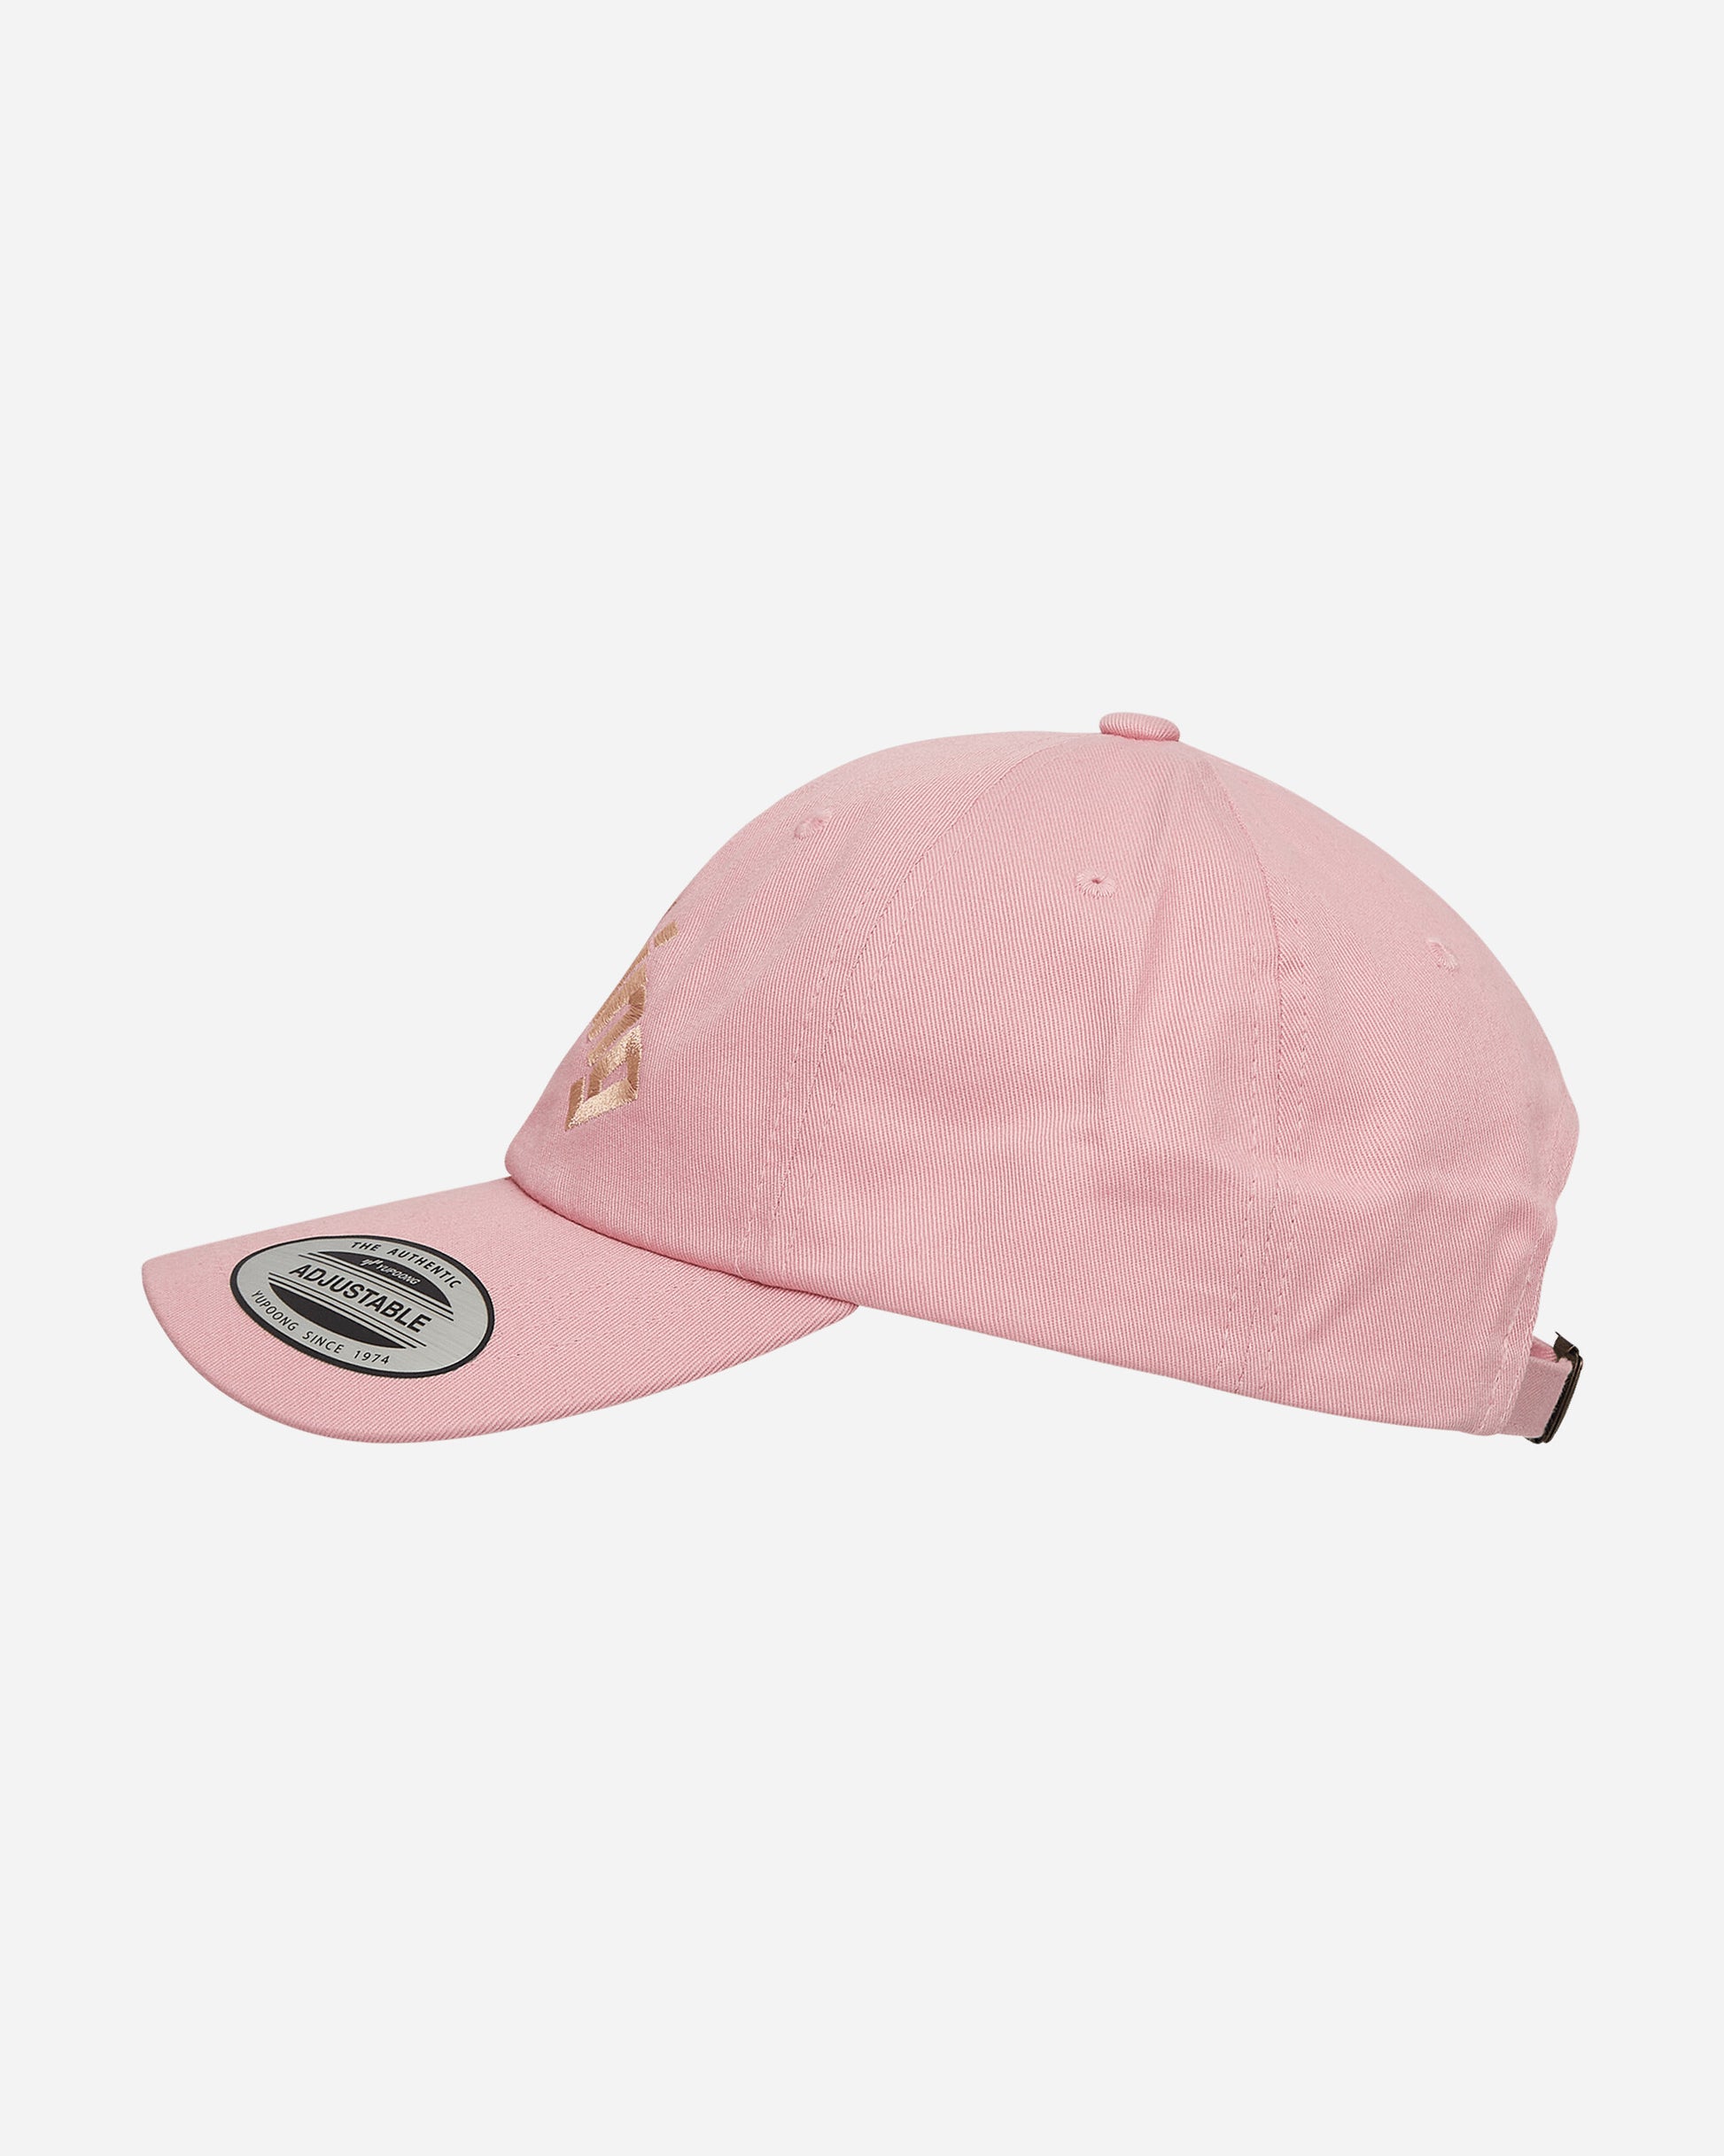 aNYthing Curved Logo Dad Hat Pink Hats Caps ANY-102 PK